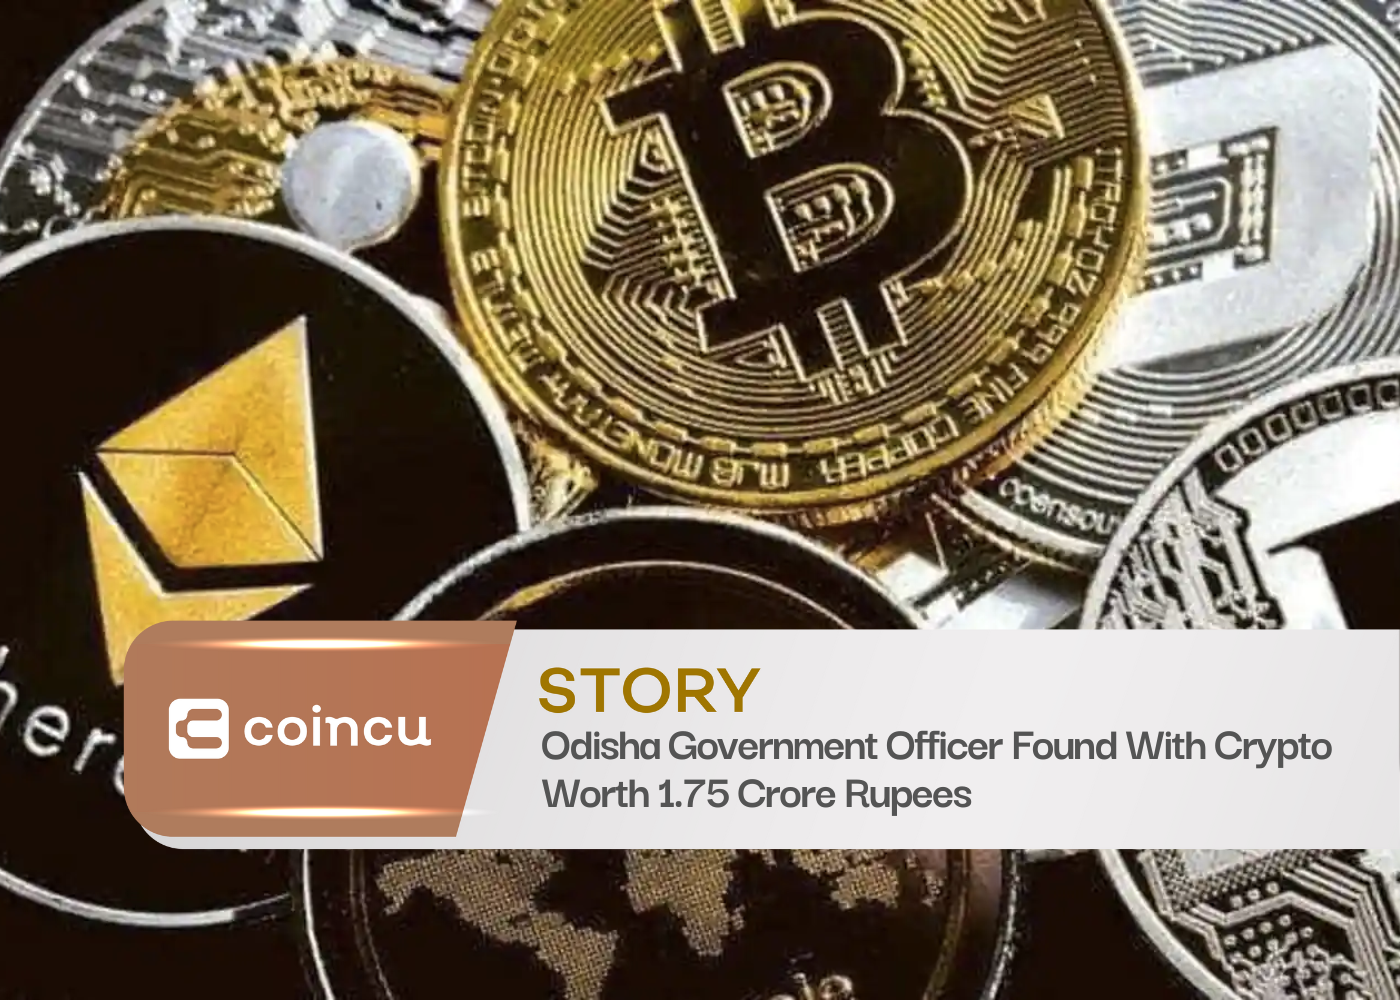 Odisha Government Officer Found With Crypto Worth 1.75 Crore Rupees